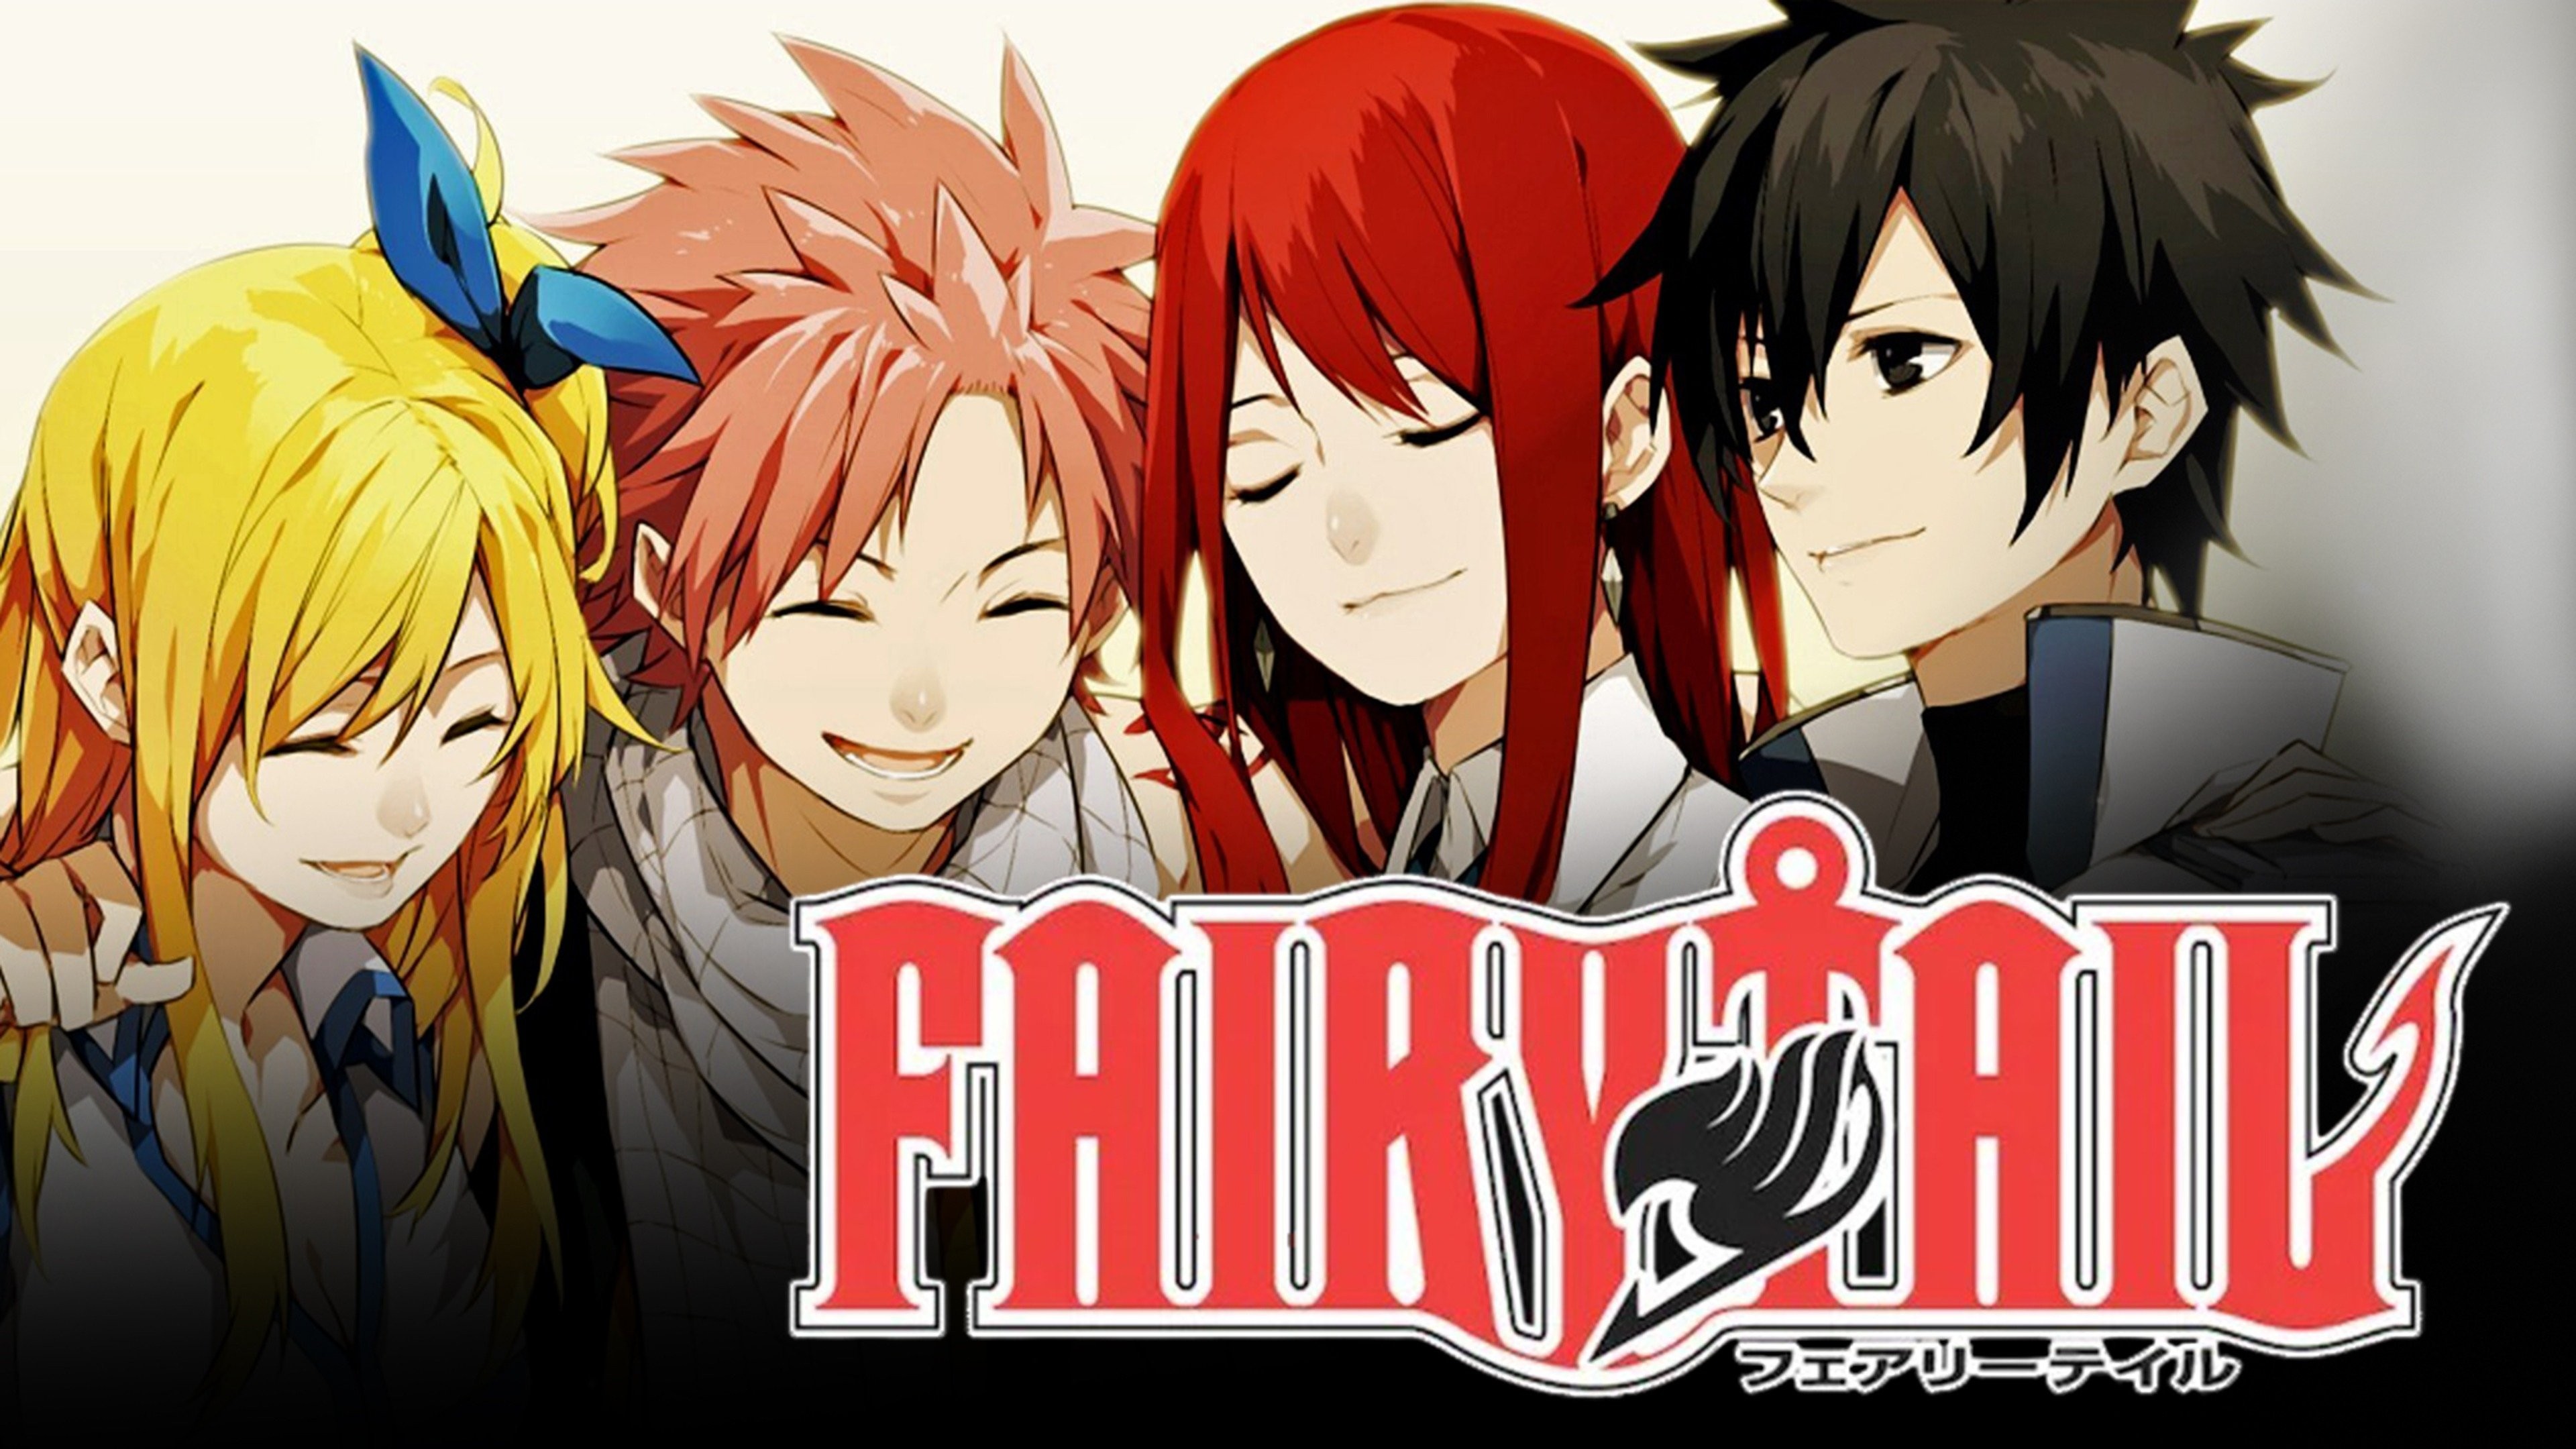 The fairytail gang - Google Search  Fairy tail season 1, Fairy tail anime, Fairy  tail photos